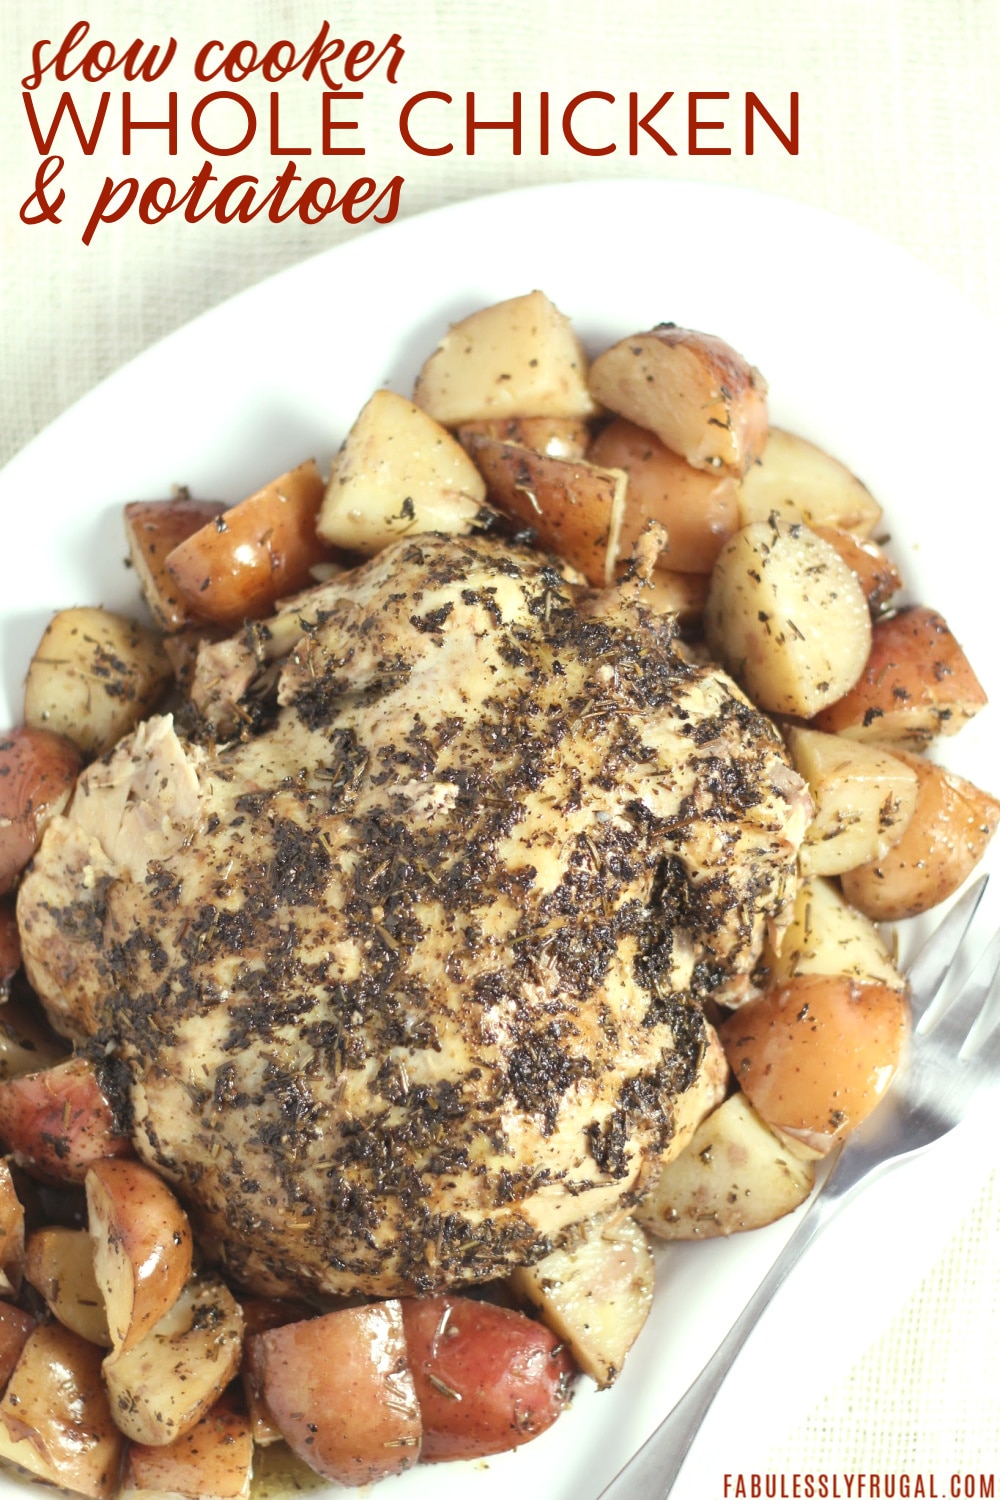 Whole chicken in crockpot with potatoes